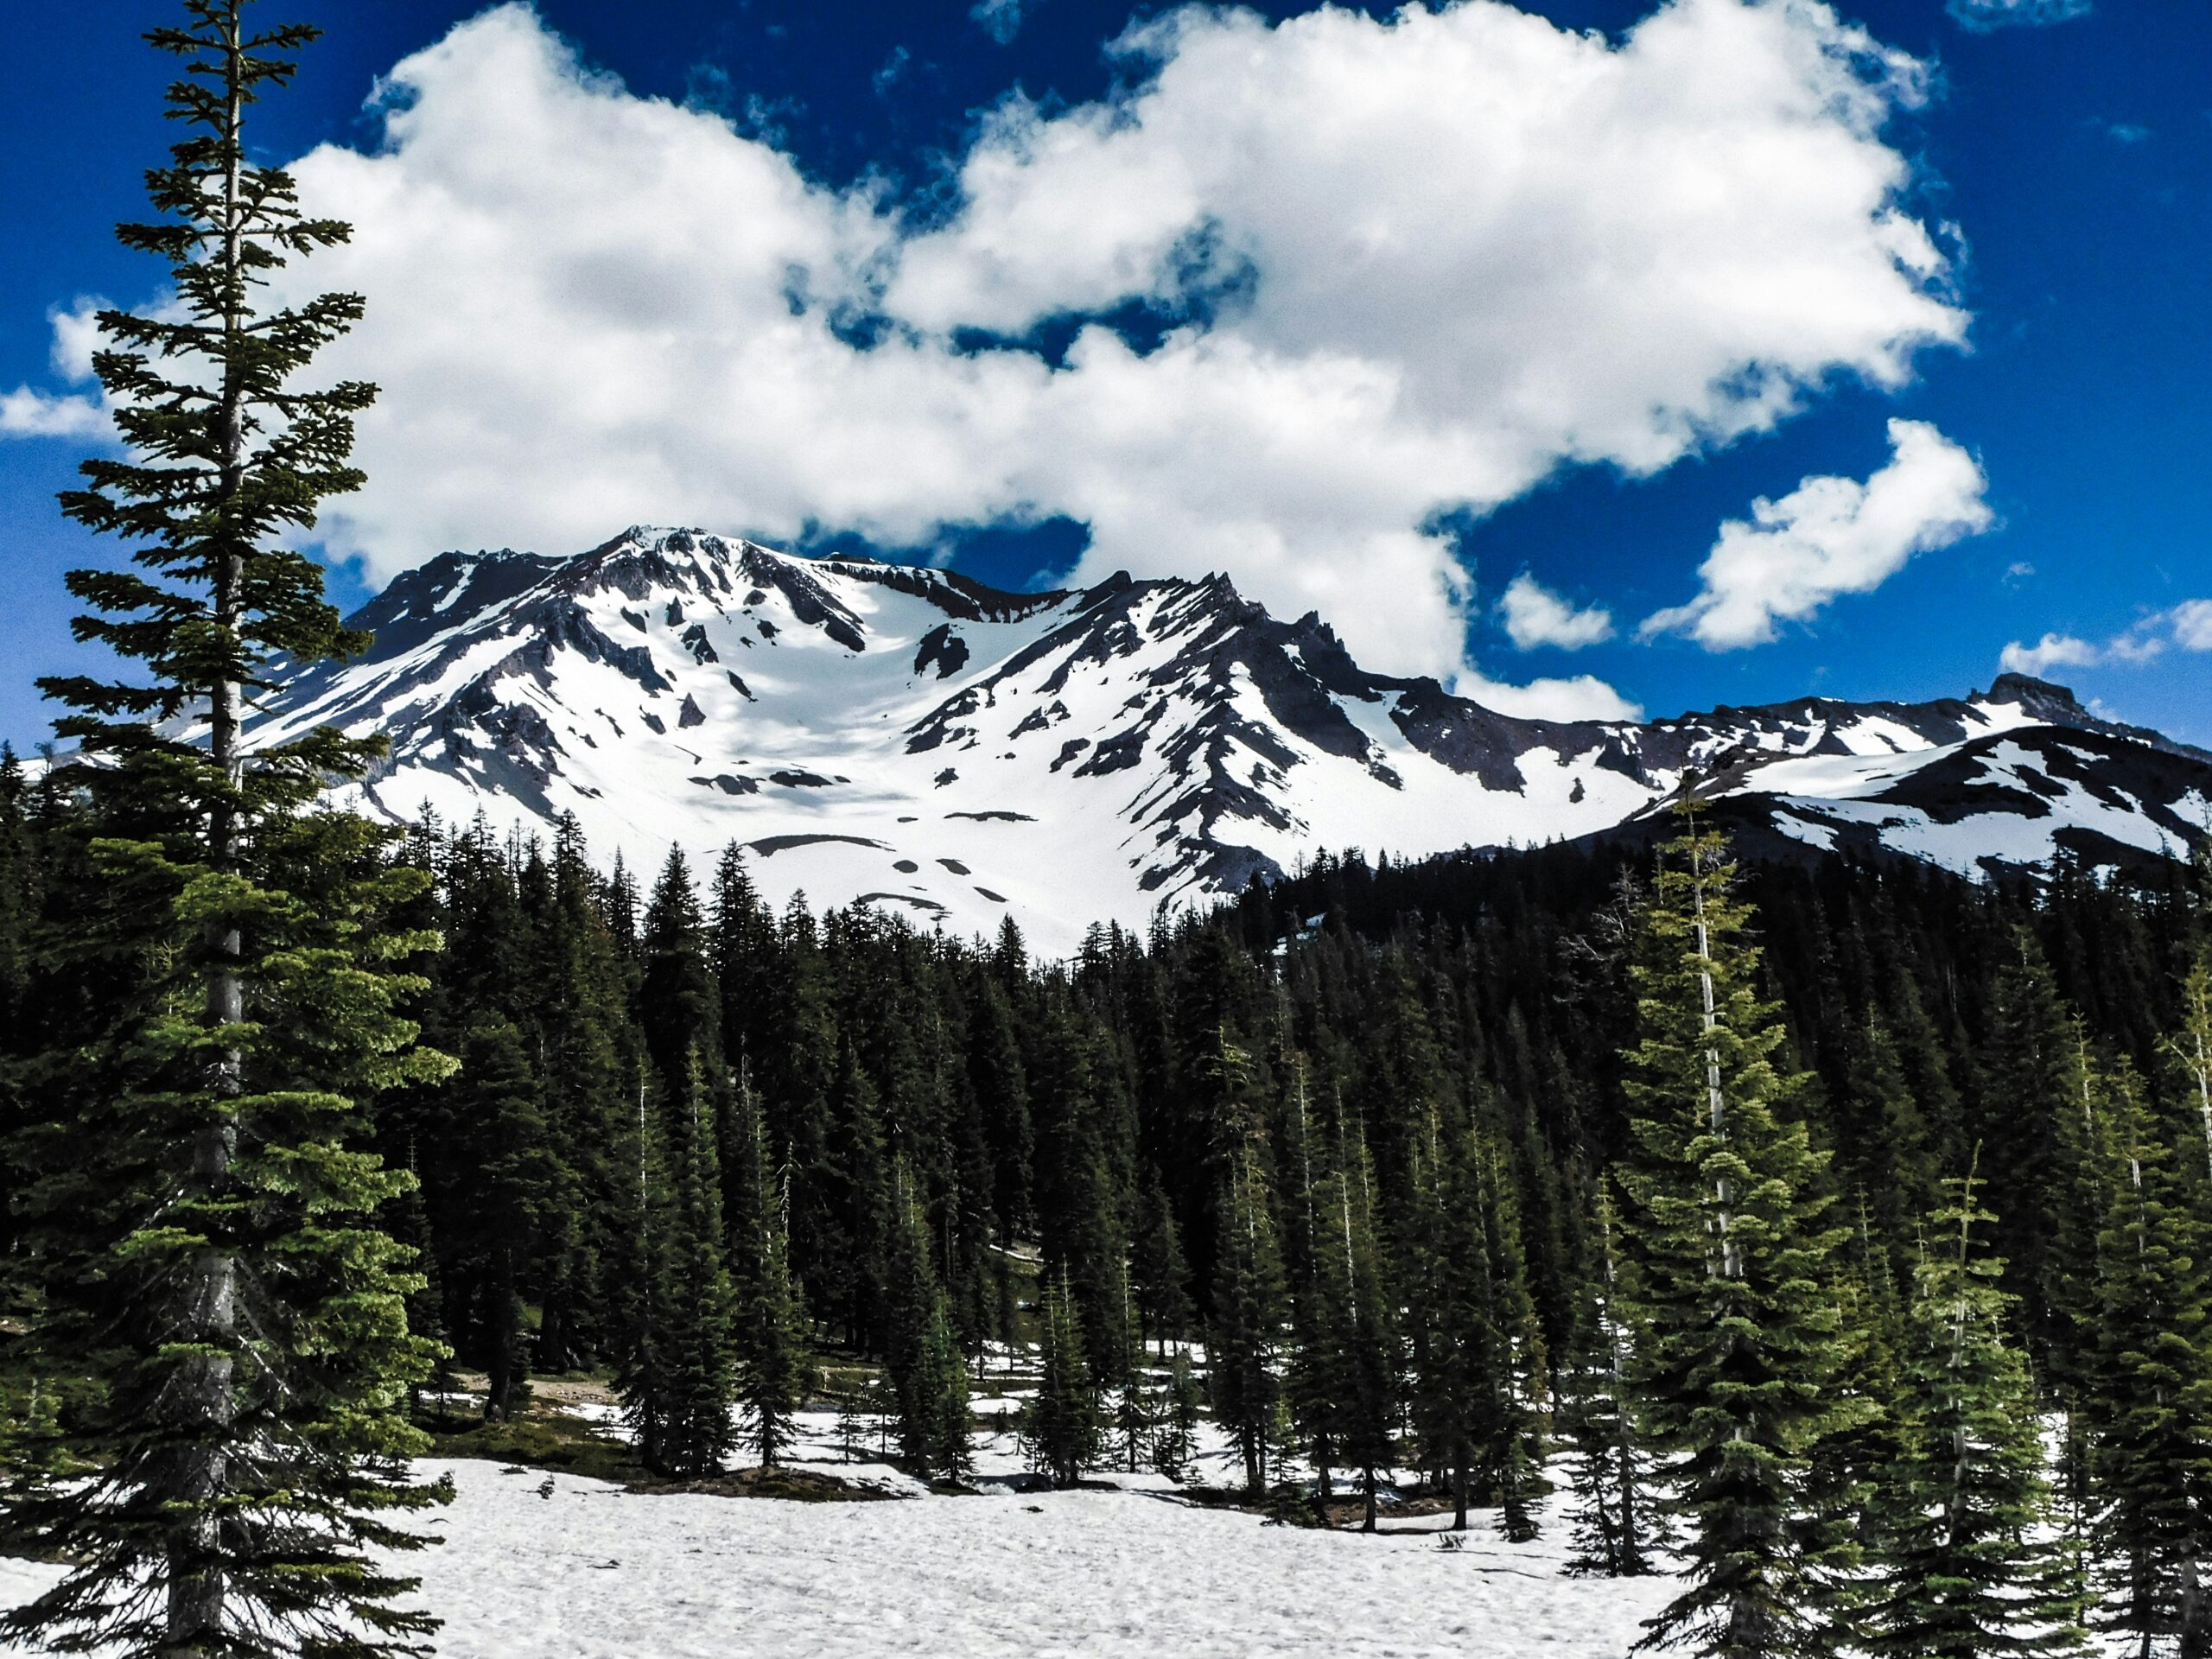 Are There Any Deaths Due To Falls From Cliffs On Mount Shasta?